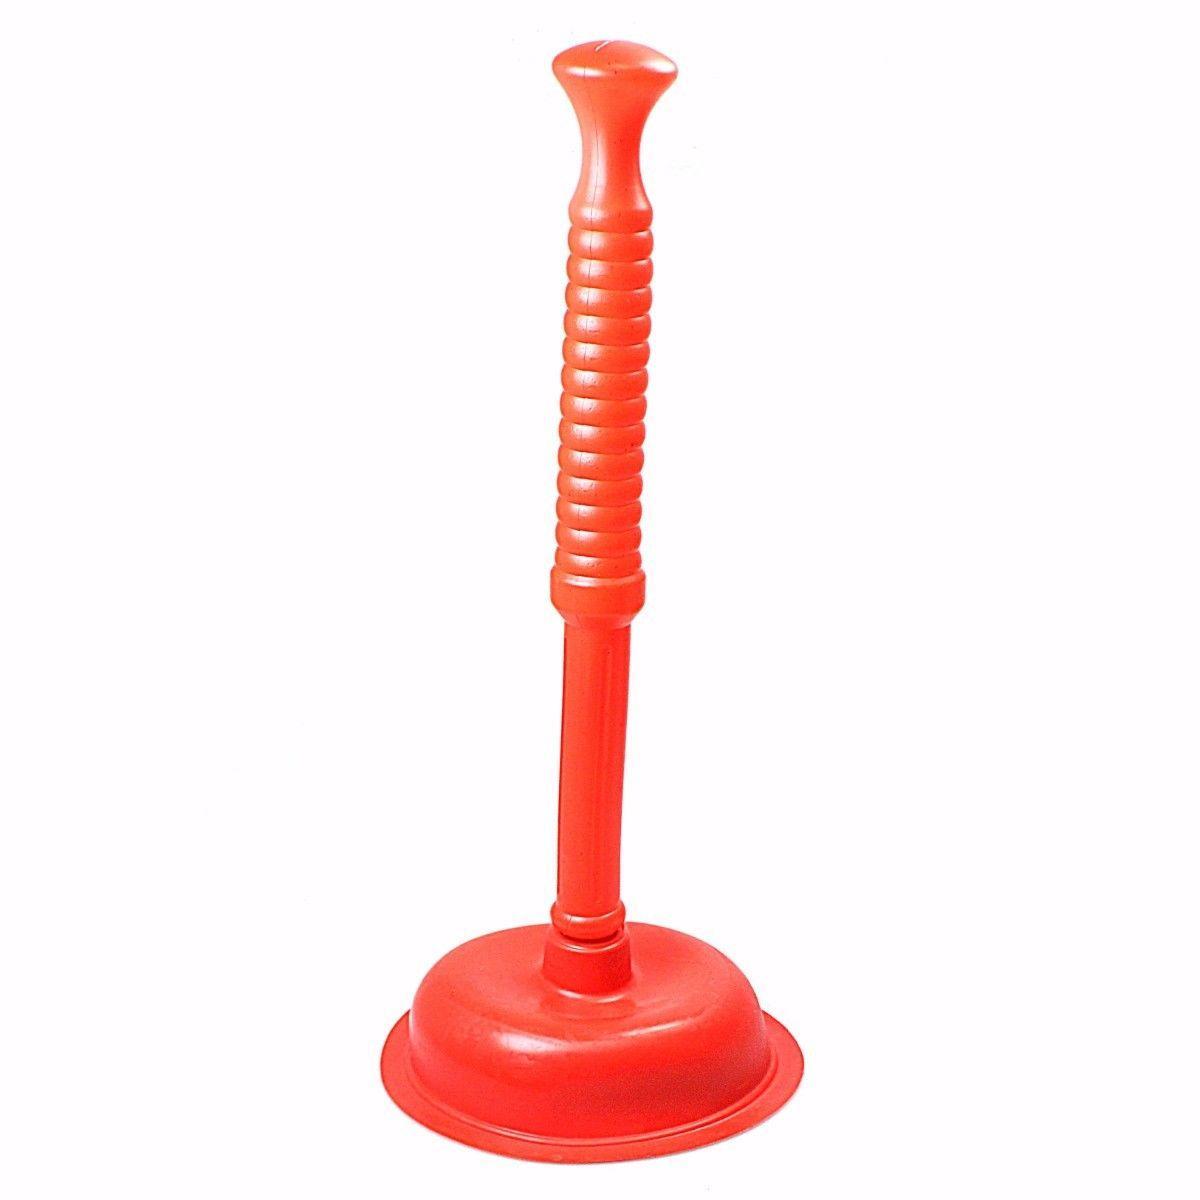 Plastic Bathroom Toilet Plunger Red 3915  A (Parcel Rate)